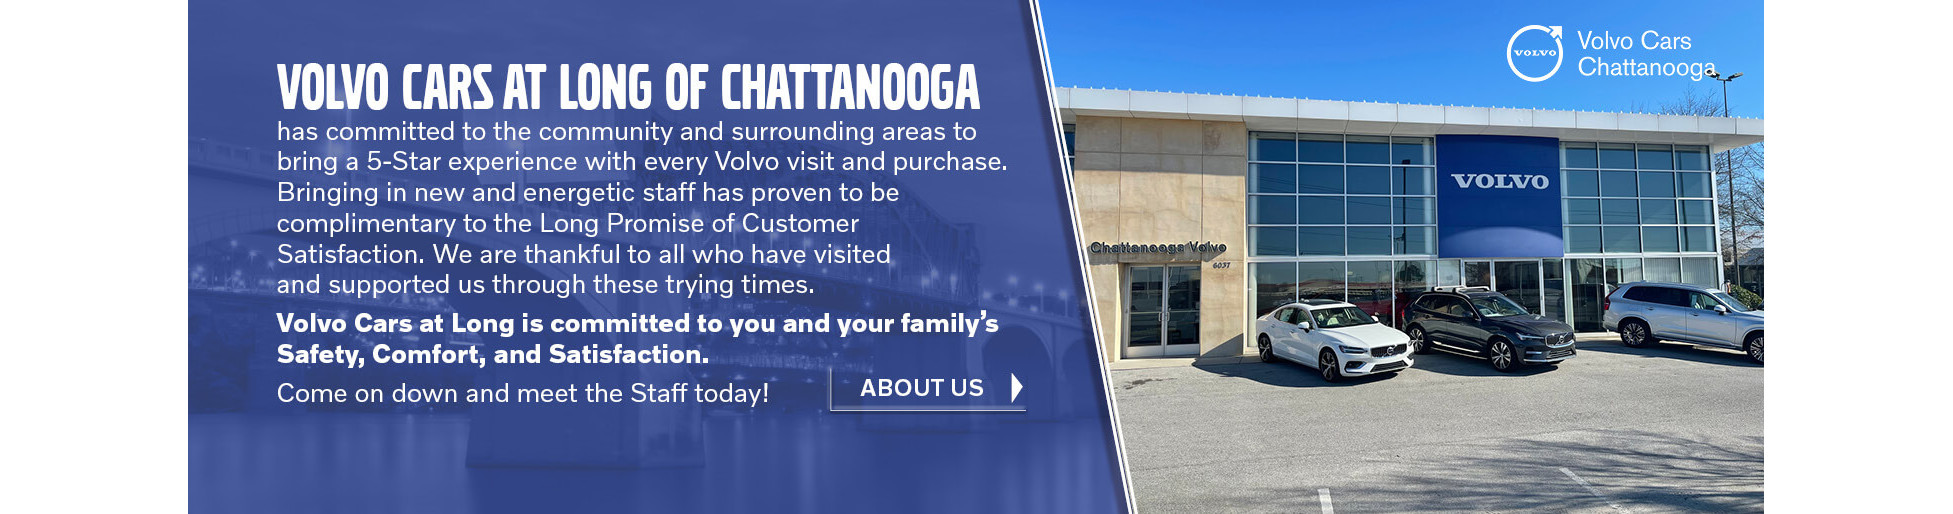 Volvo Cars of Chattanooga